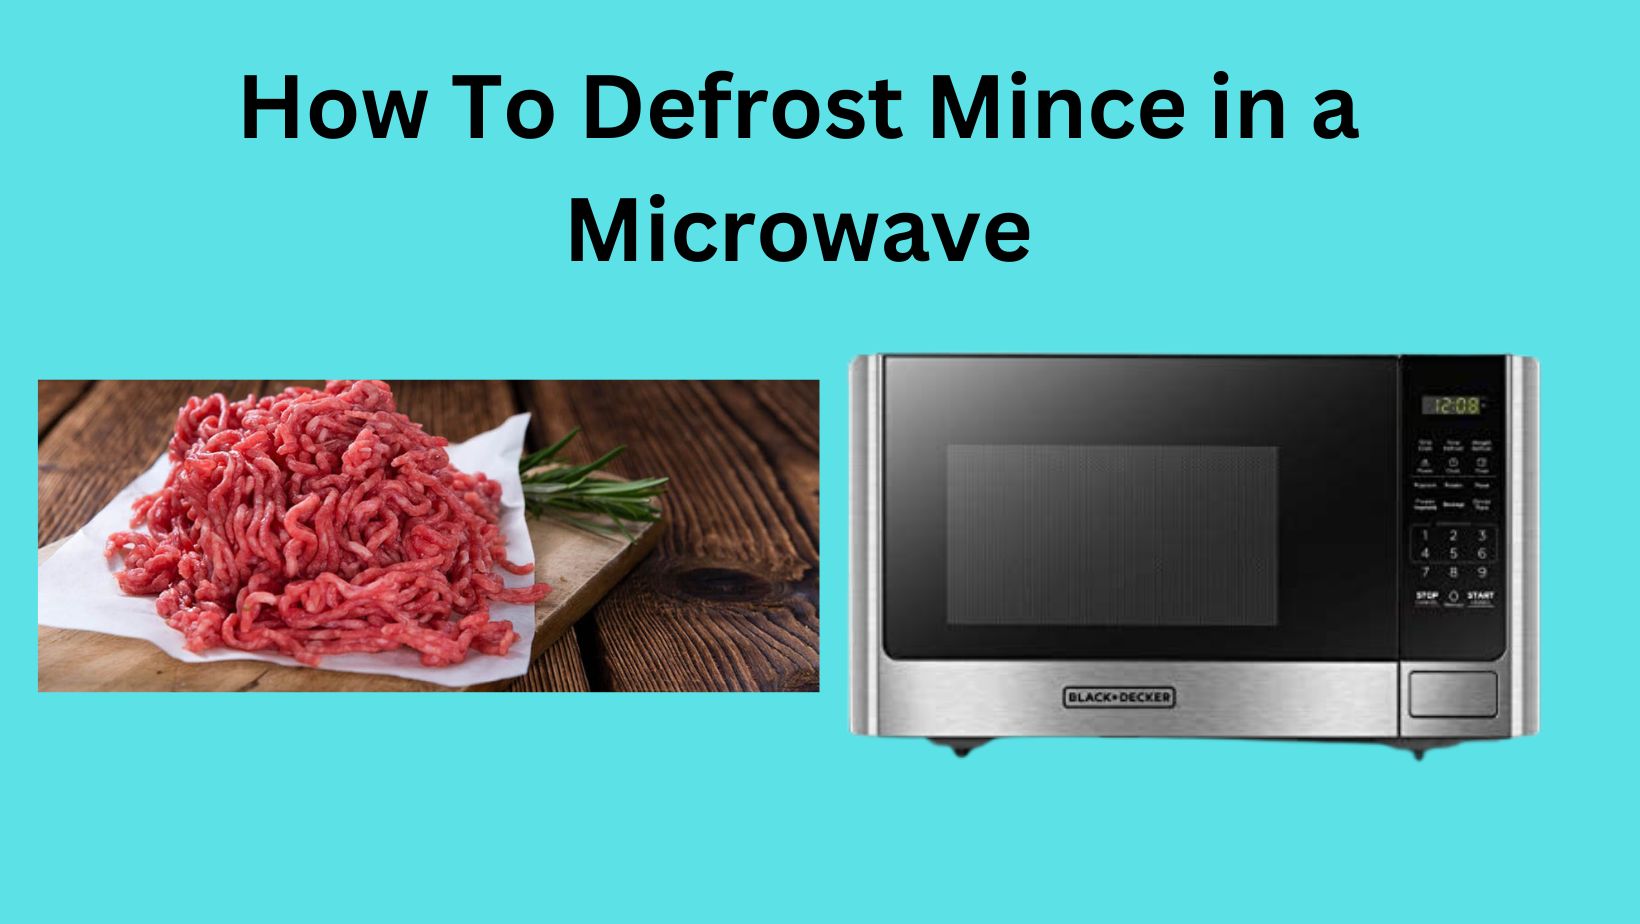 How To Defrost Mince in a Microwave